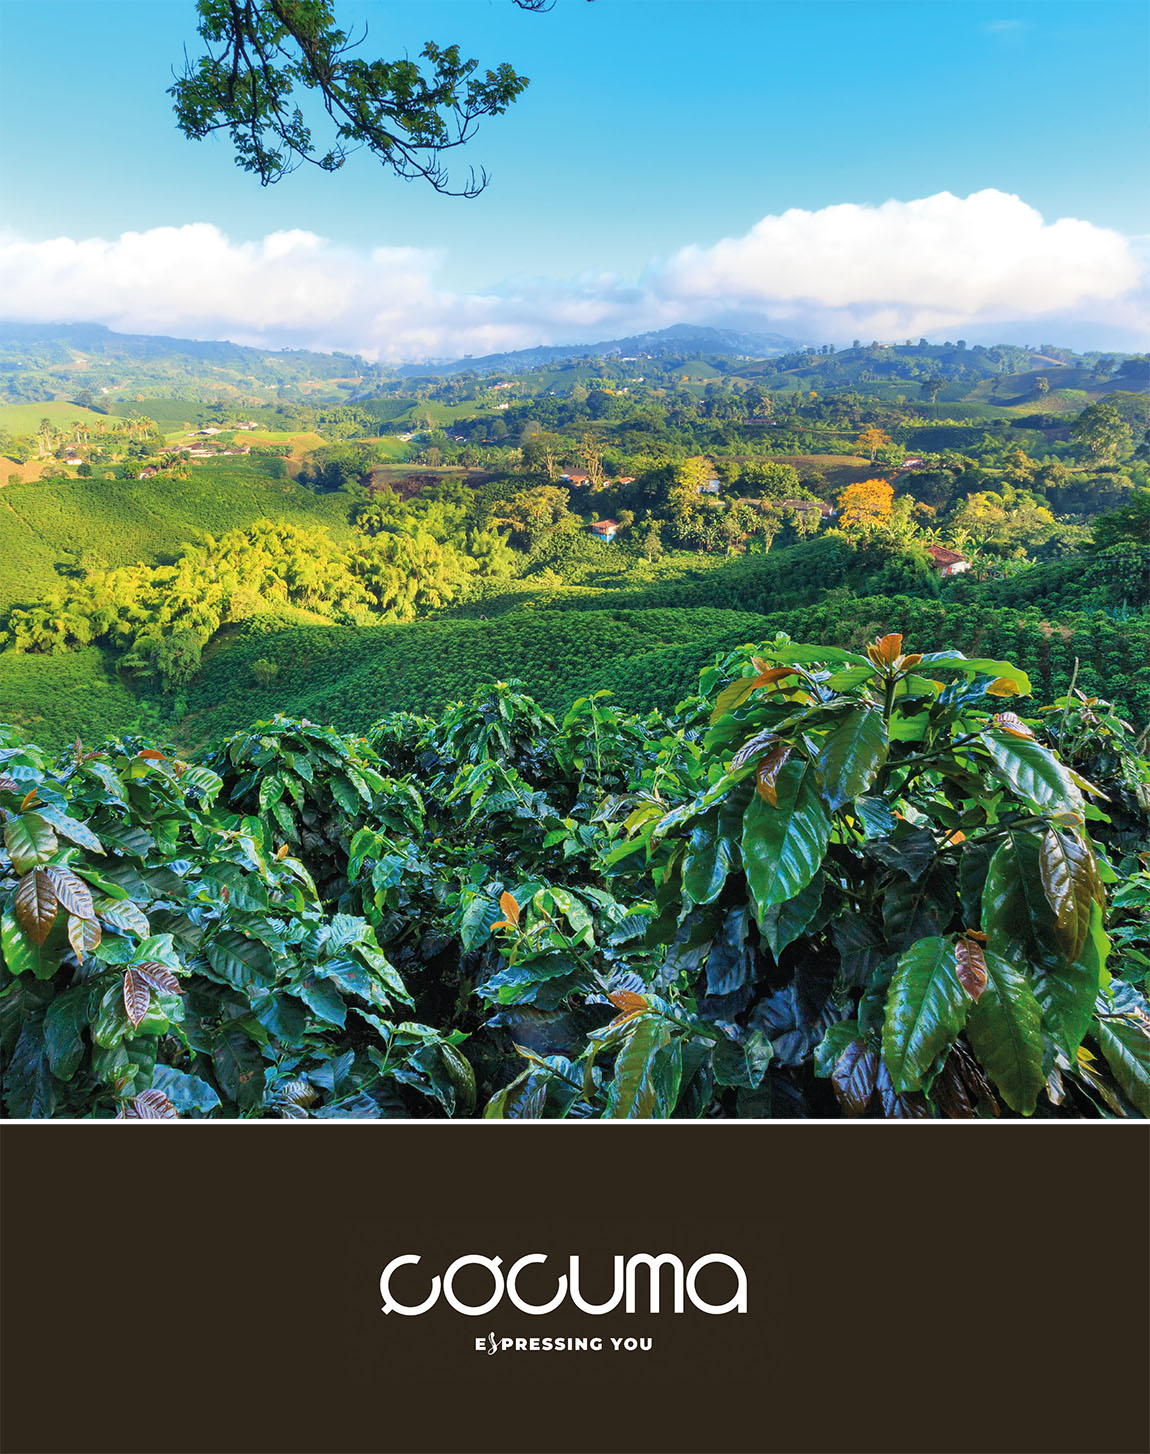 COCUMA Caffè: THE THOUSAND FLAVOURS OF OUTSTANDING COFFEE